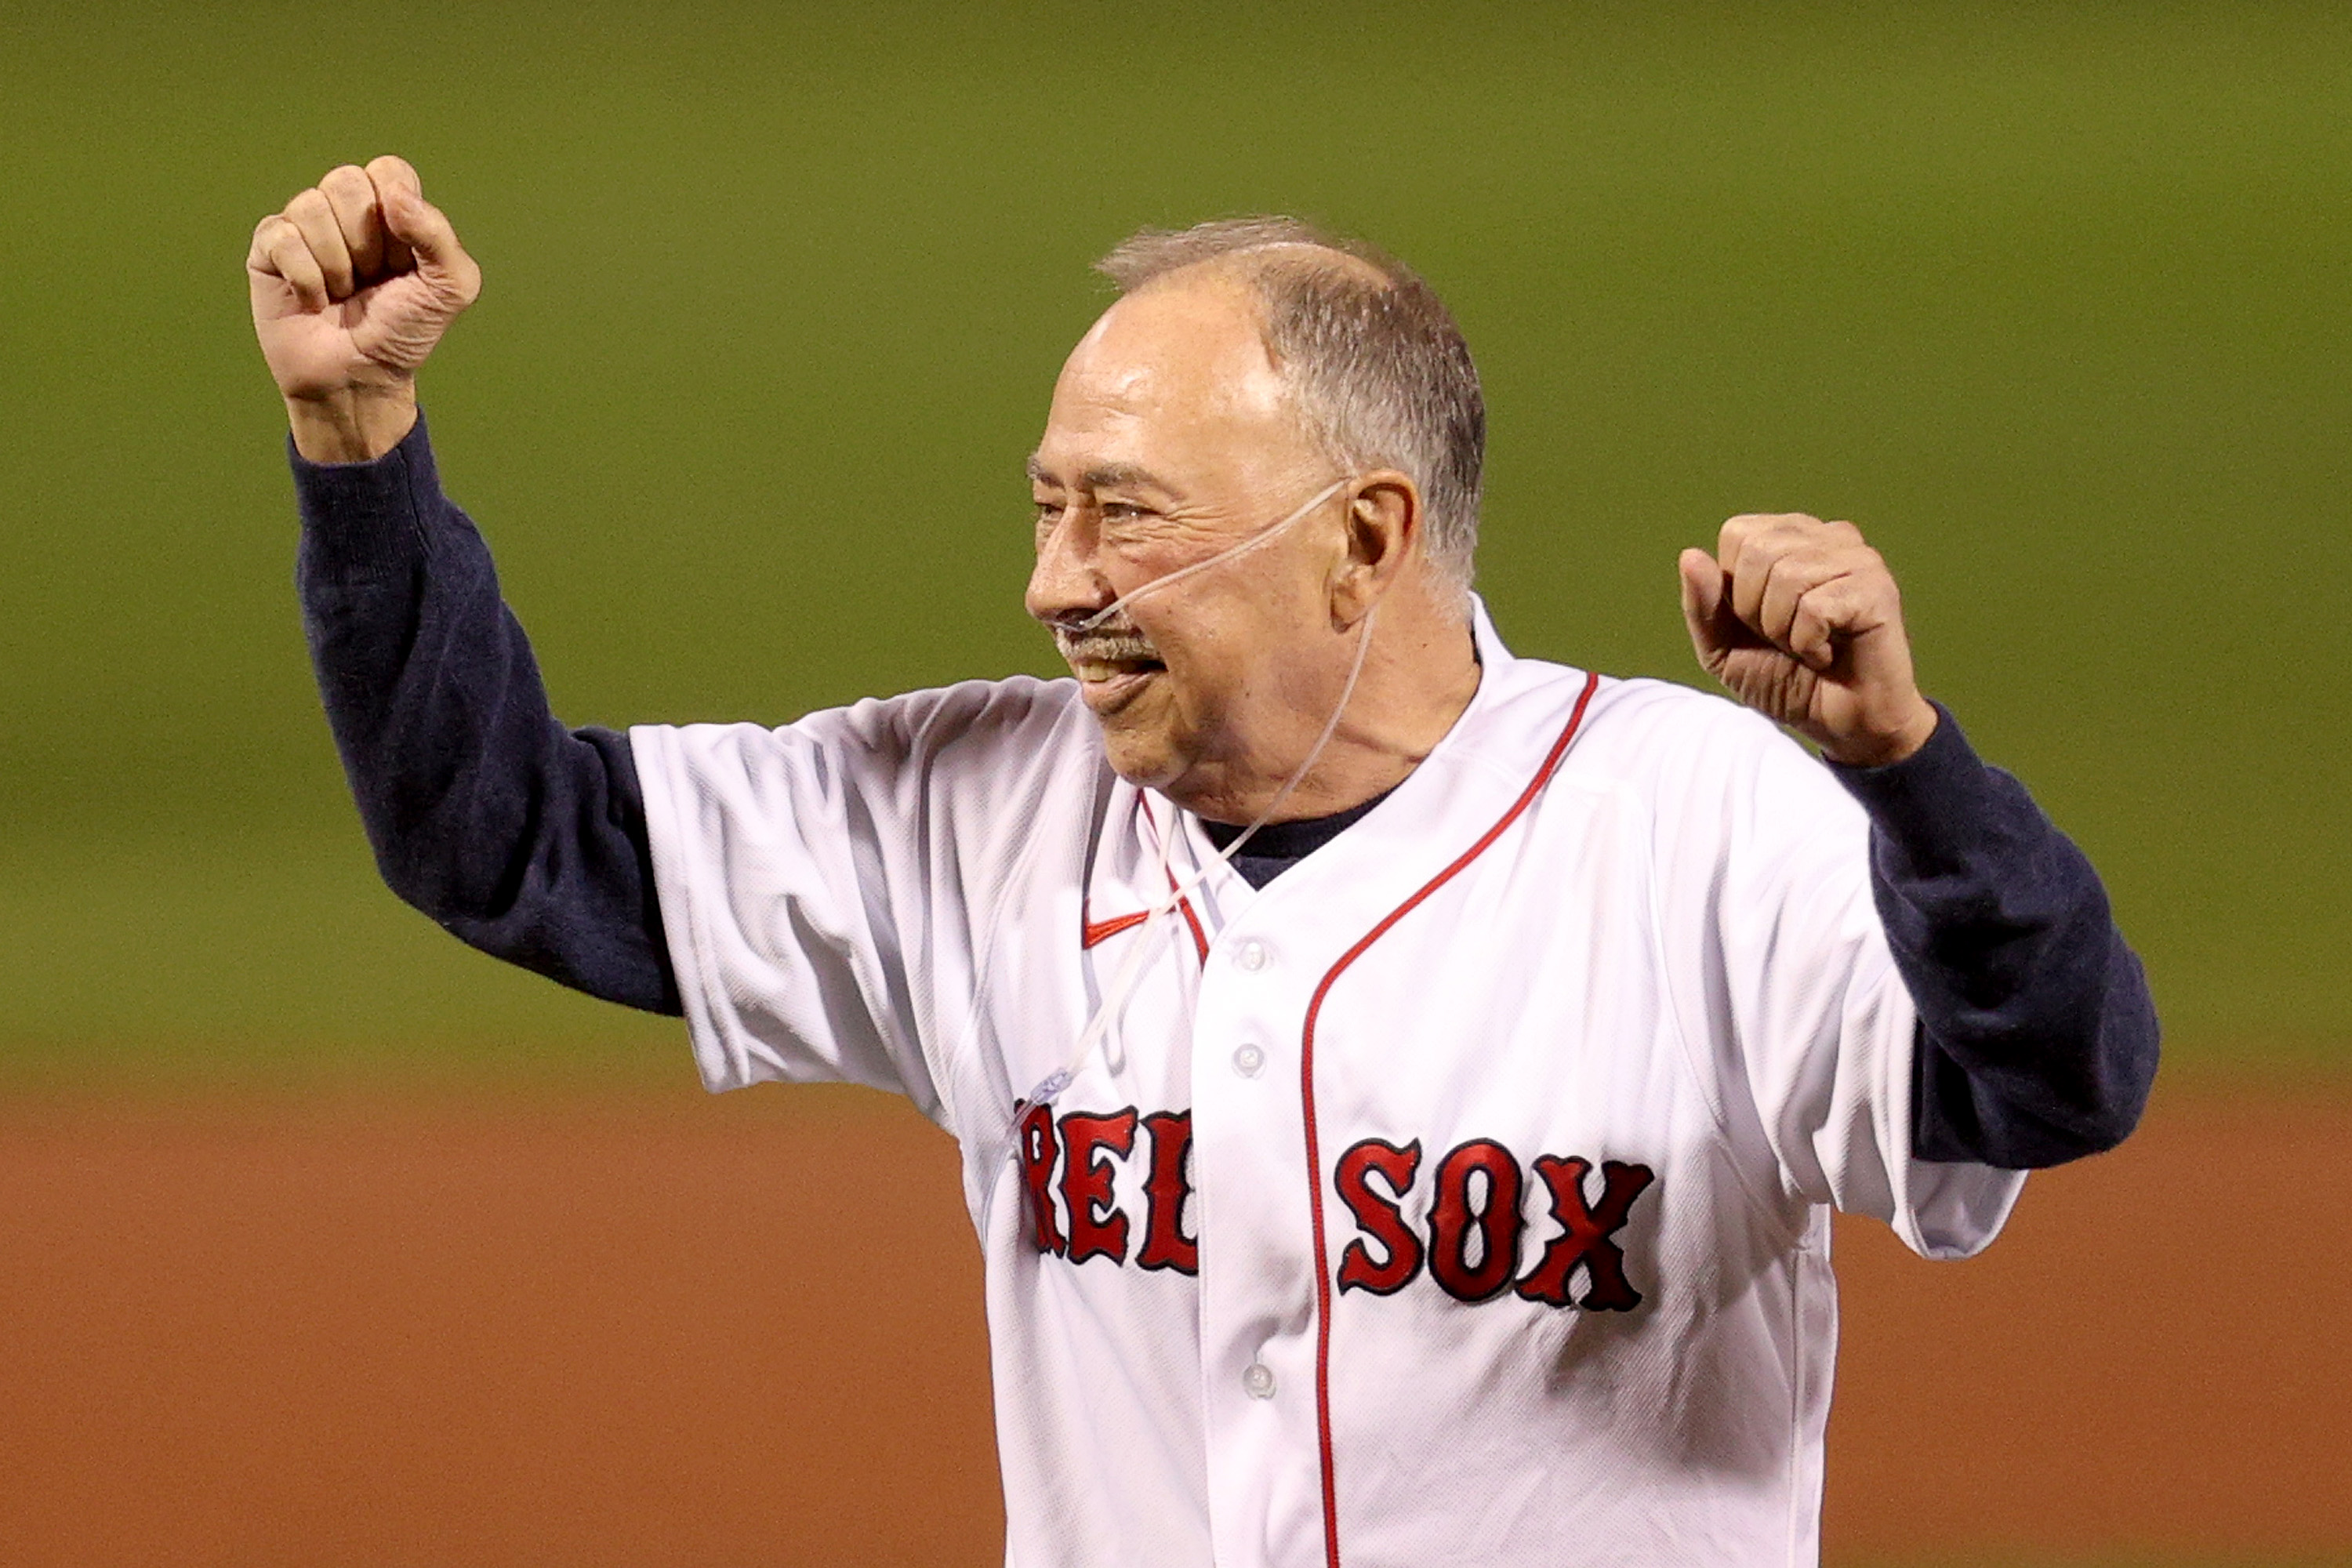 Jerry Remy threw the first pitch ahead of the Red Sox's Wild Card Game win over the Yankees in early October.  It was his last time at Fenway.